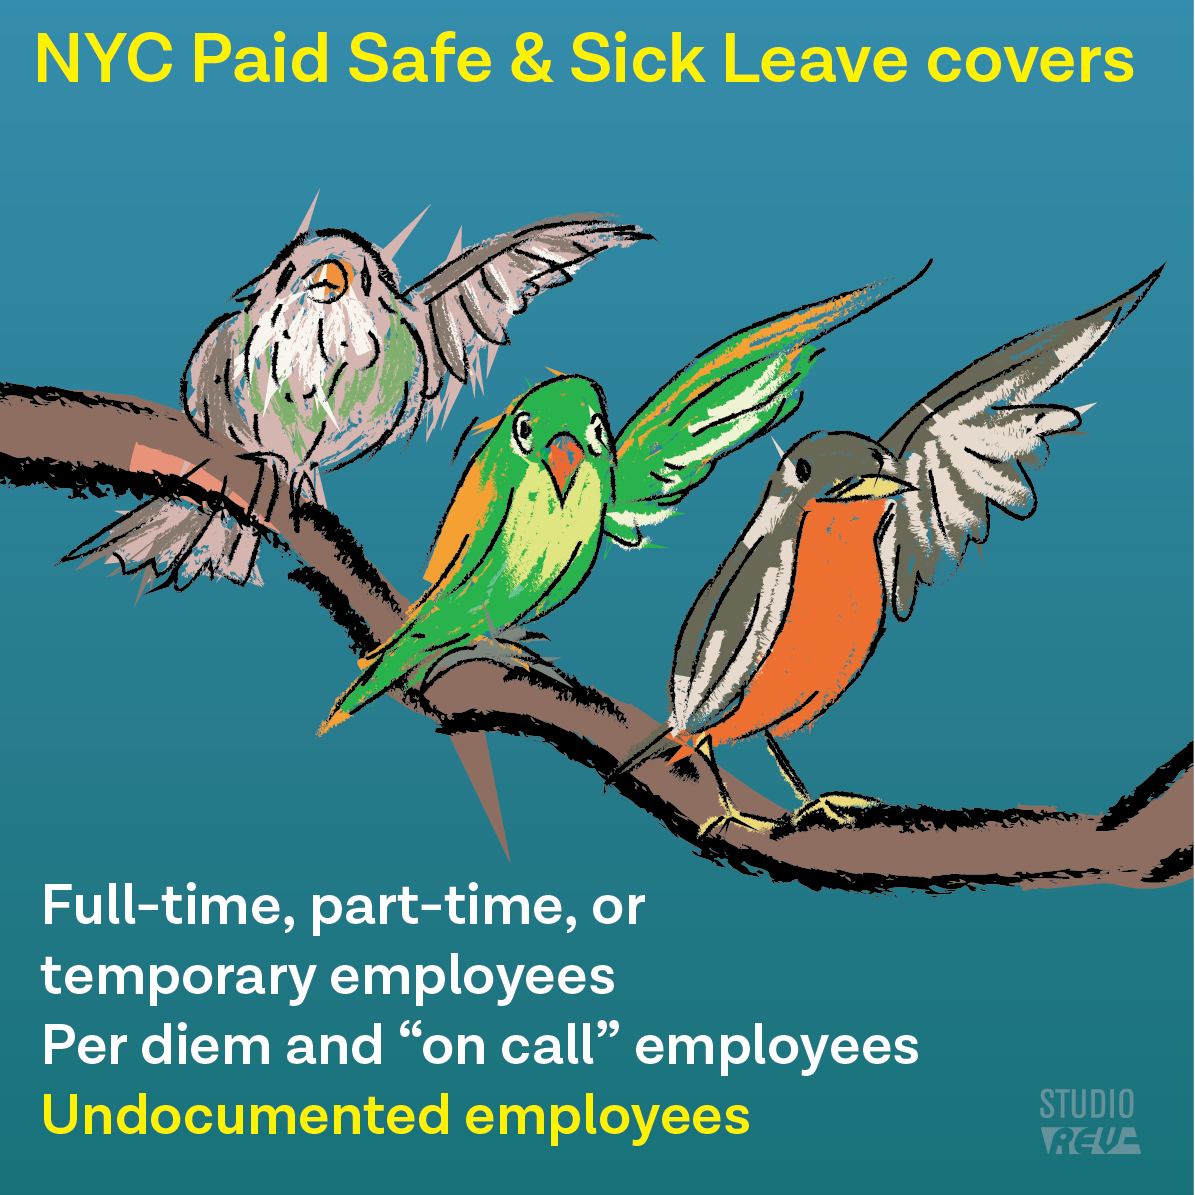 WhoCovered_NYCPaidSickLeave.png